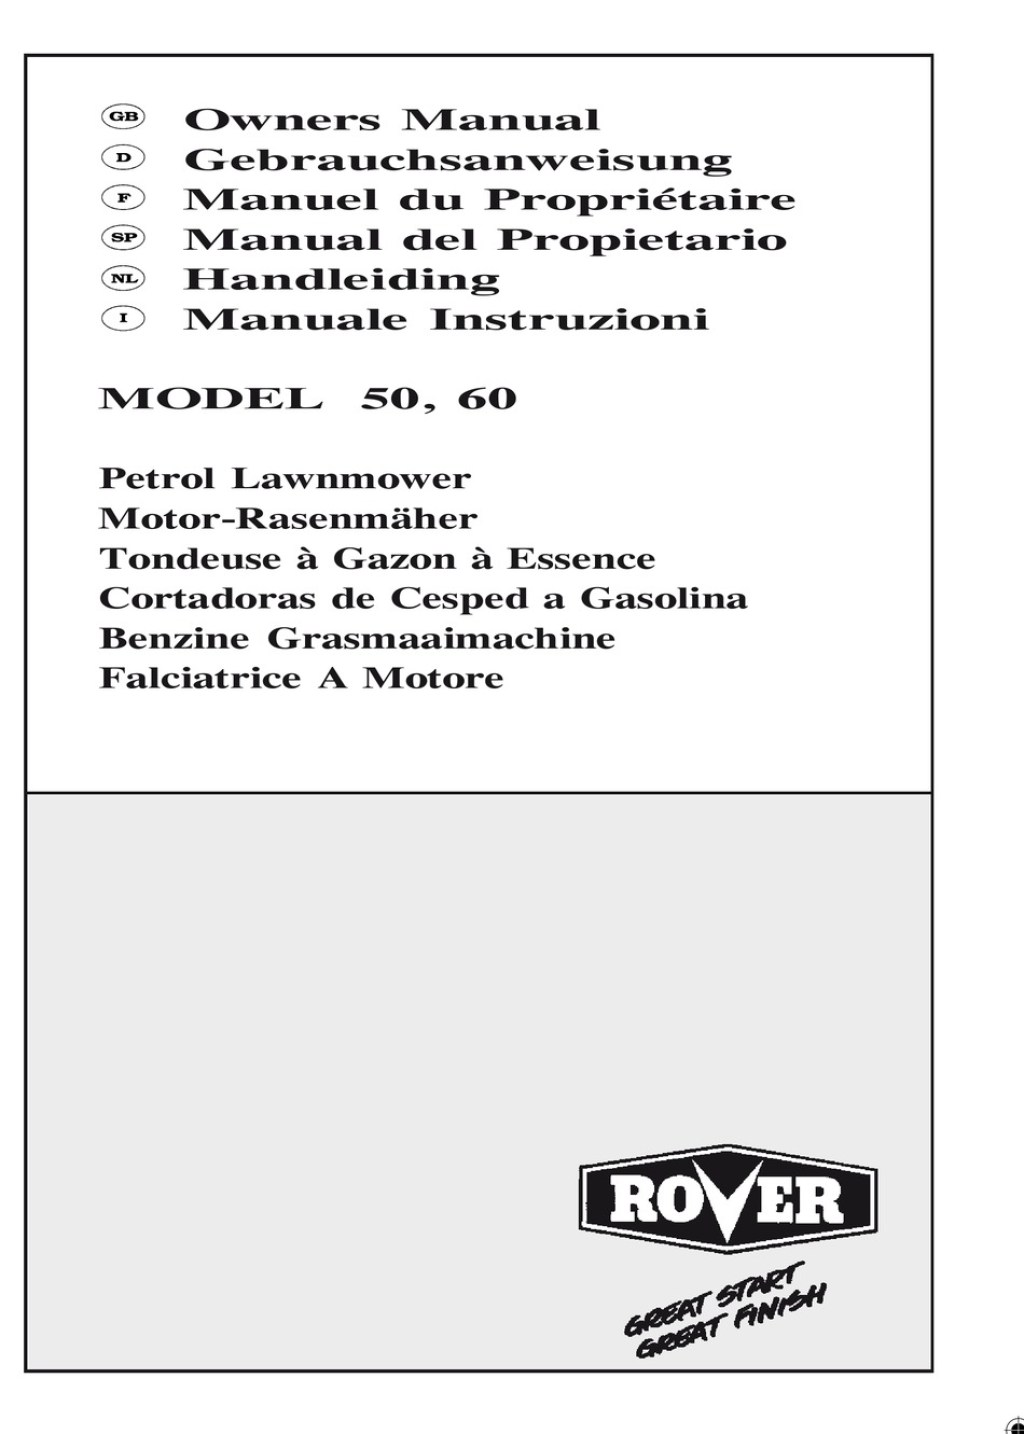 Picture of: ROVER ,  OWNER’S MANUAL Pdf Download  ManualsLib